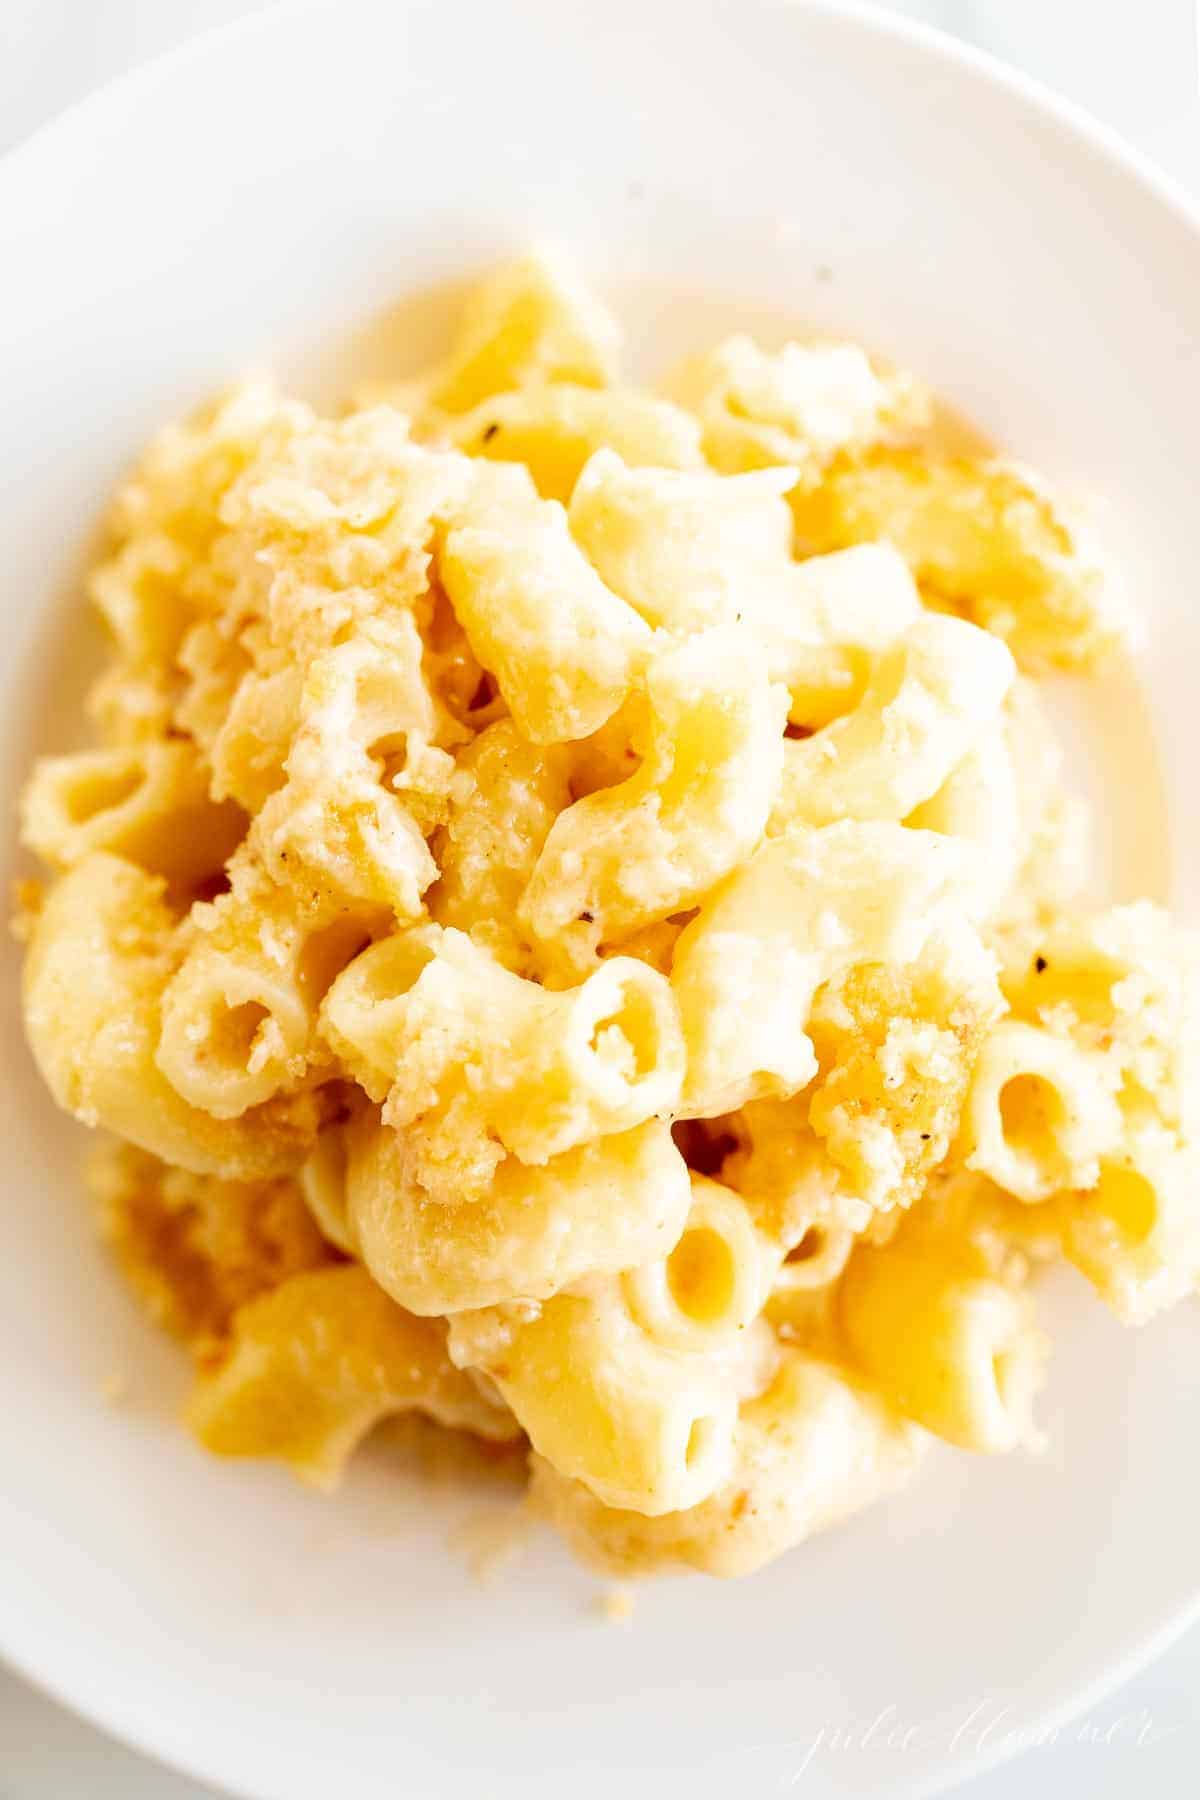 A serving of baked macaroni and cheese on white plate